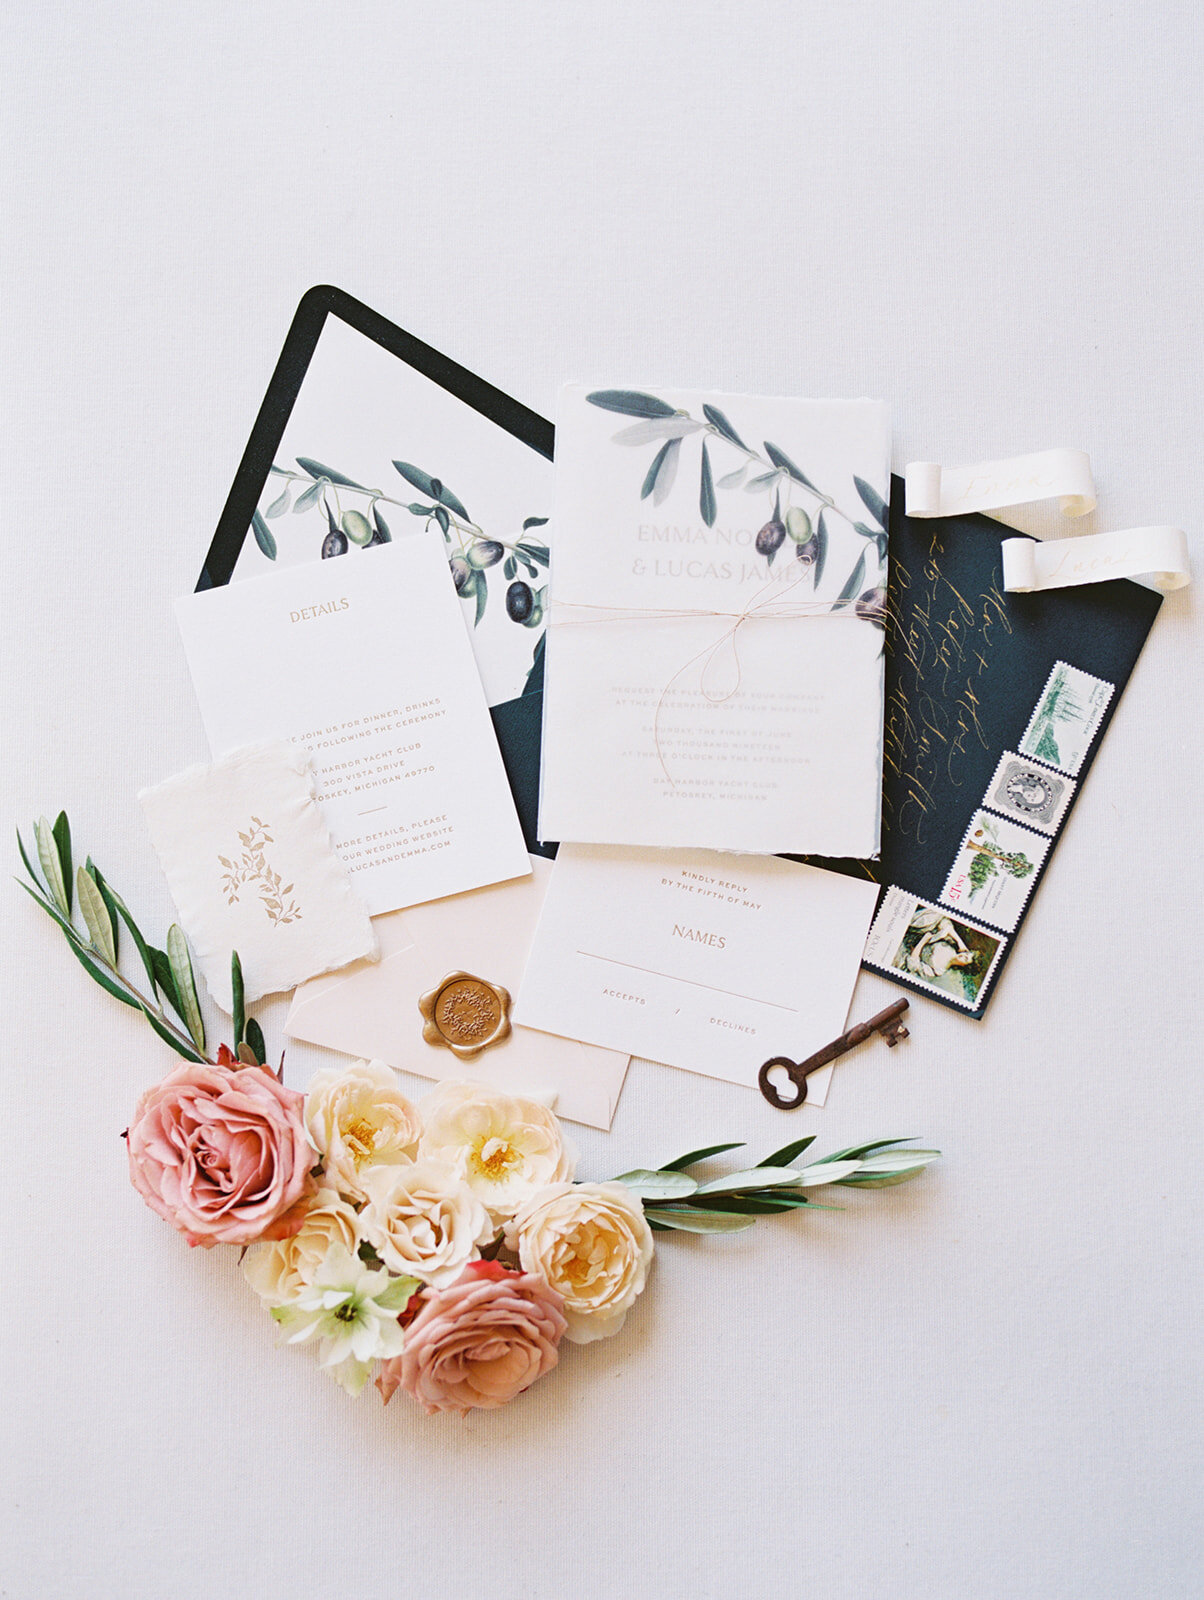 A detailed photo of wedding invitations with flowers next to them